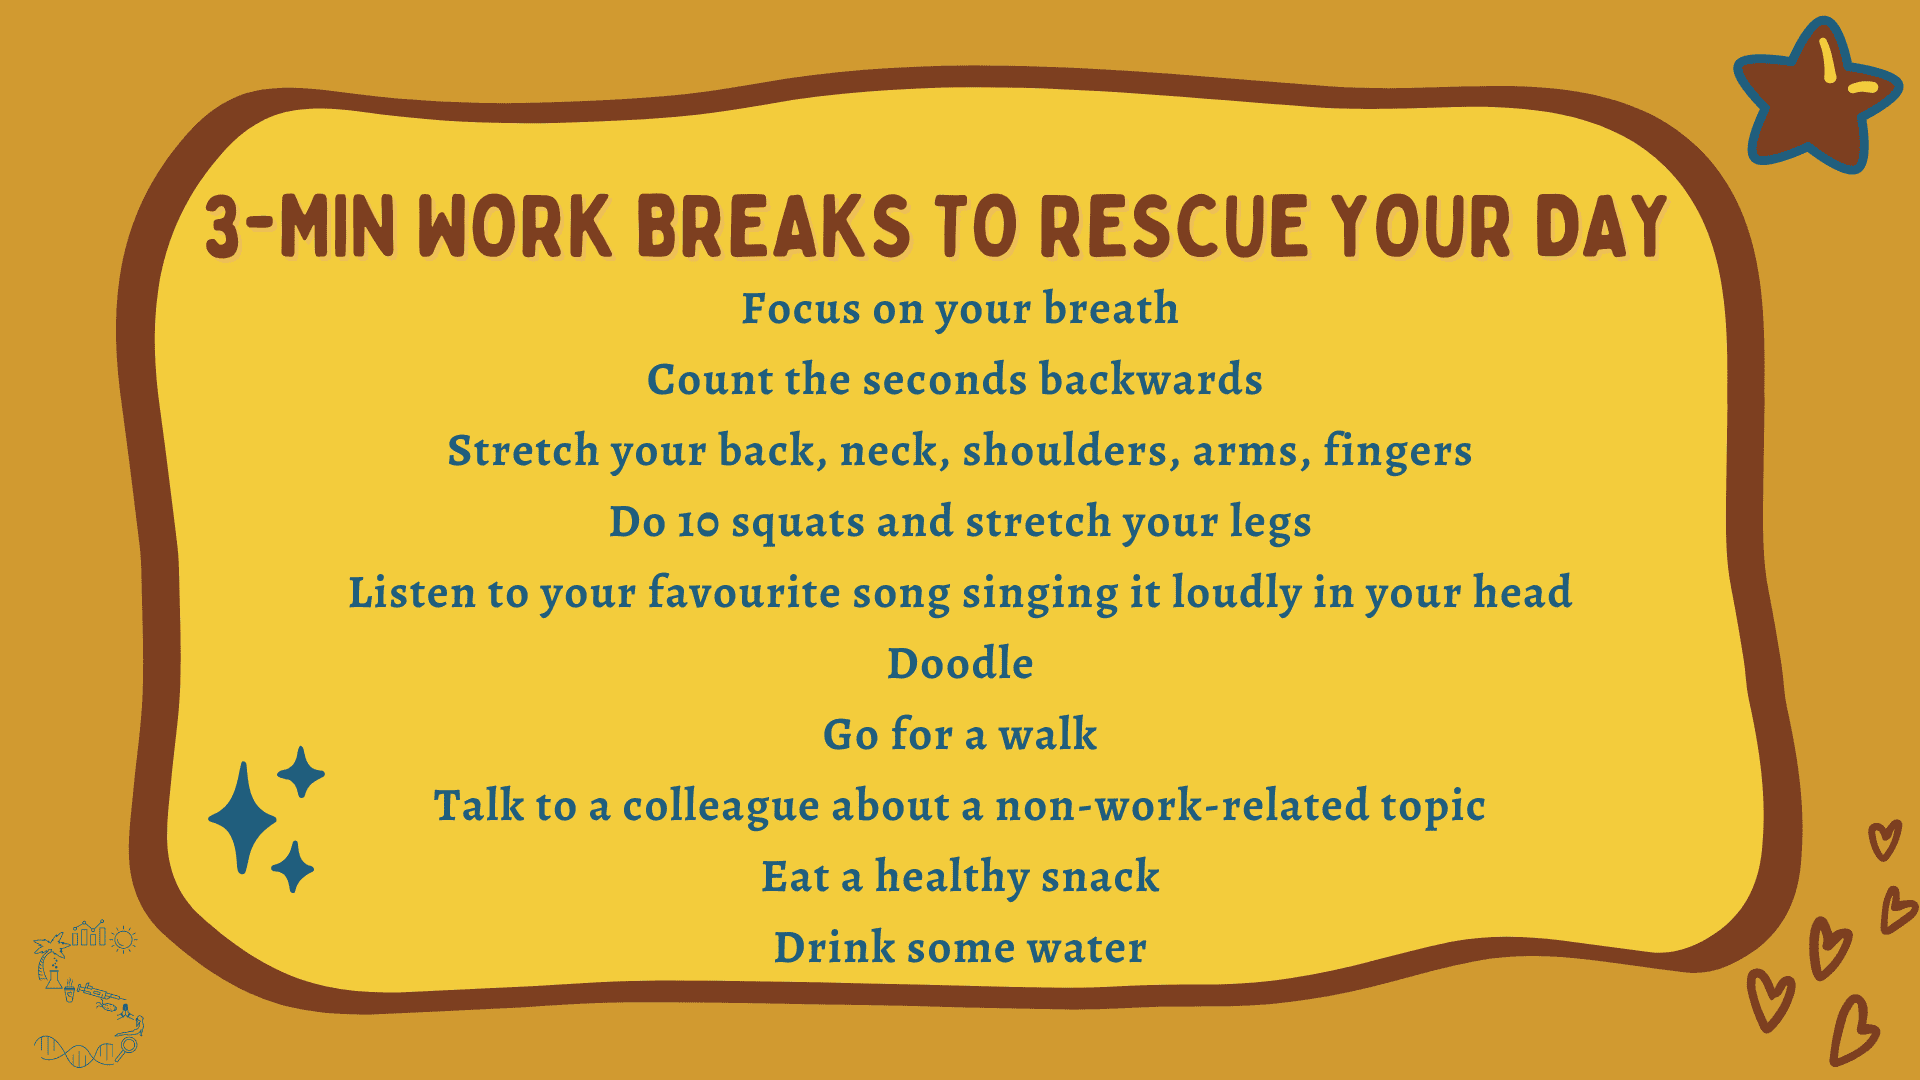 3-min work breaks to energise and rescue your day.